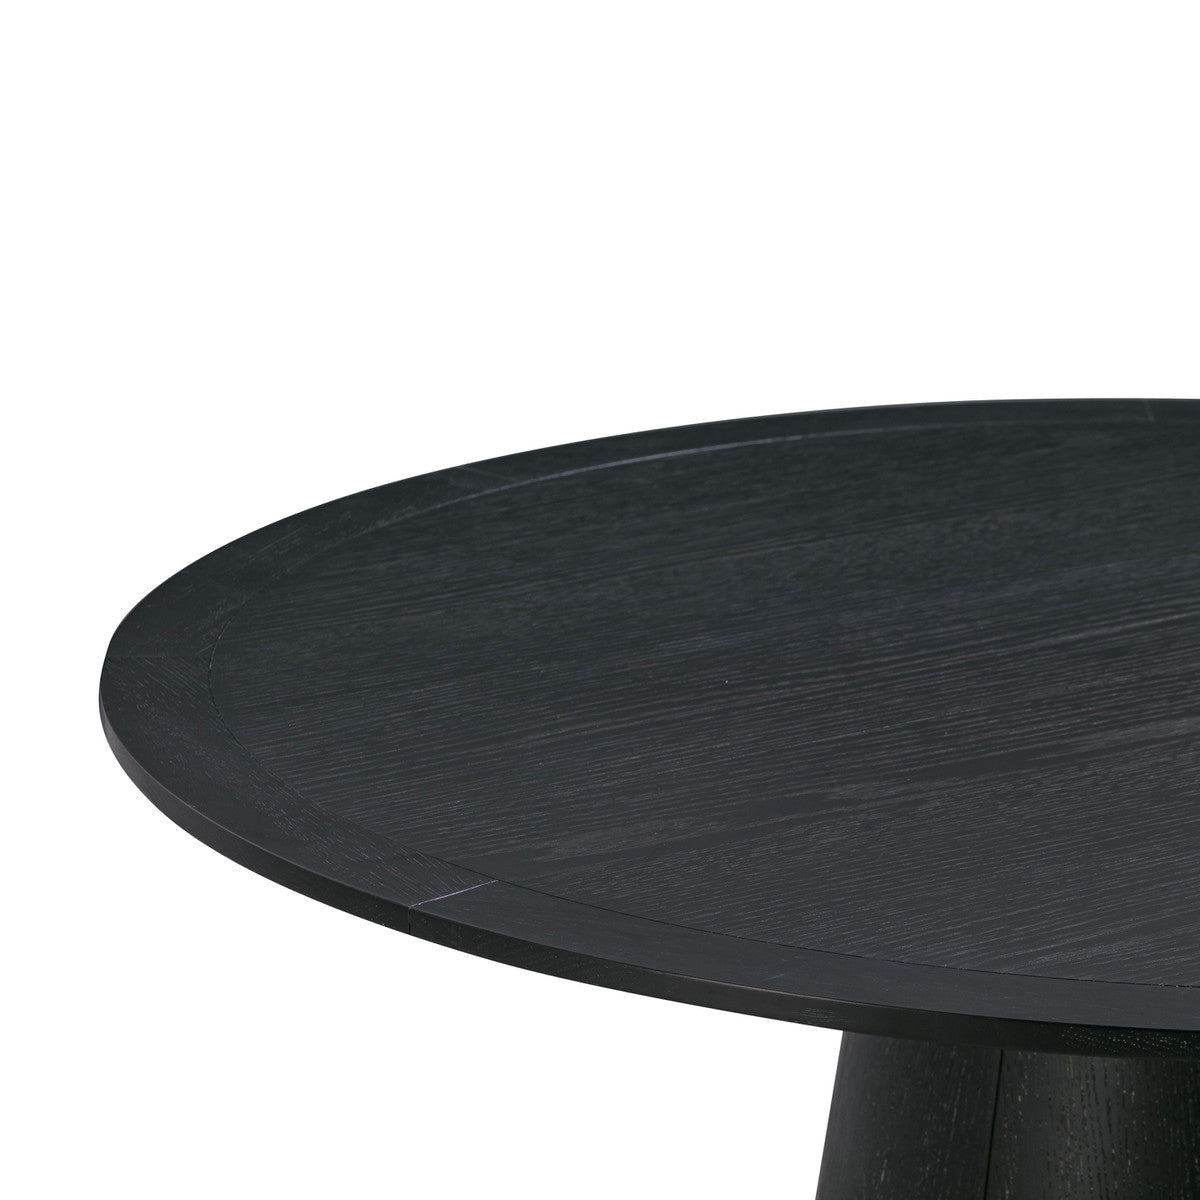 Sampa Black Oak Round Dining Table - Luxury Living Collection